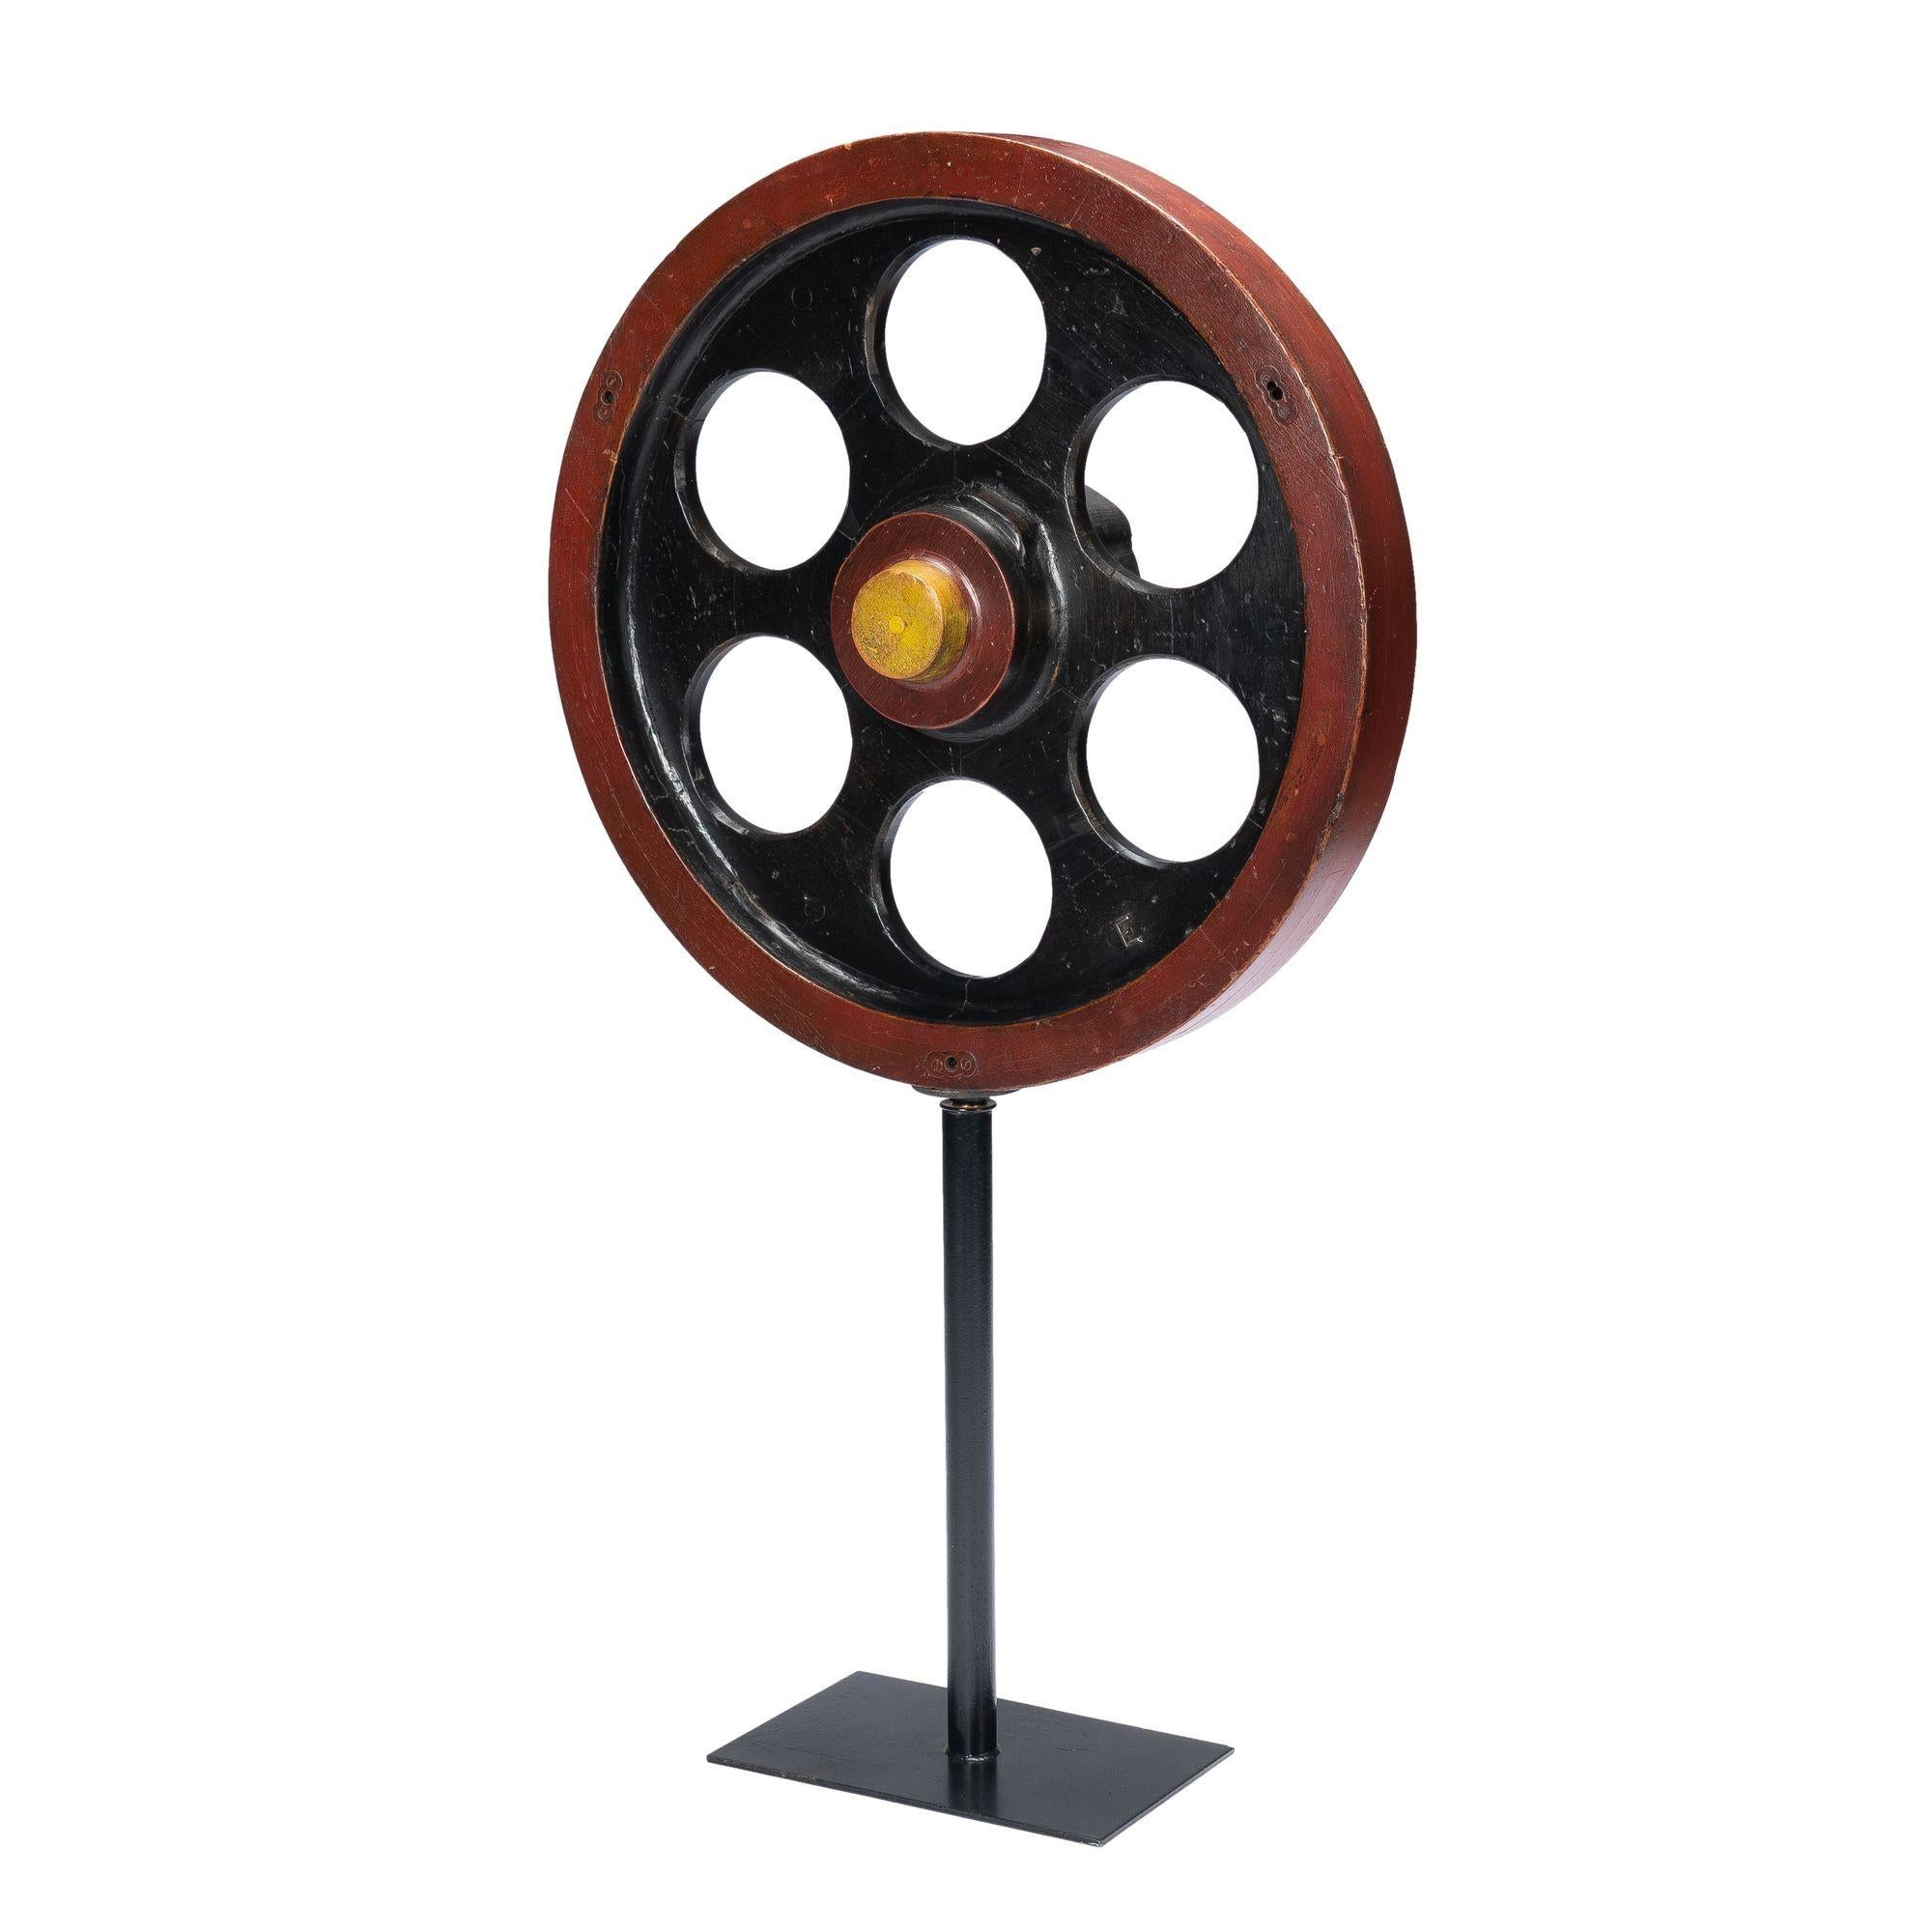 Wooden wheel casting mold with 6 circular holes around a raised axel stub. The wheel is painted in identifiable parts with areas of black, oxide red, and yellow. Mounted on a custom oxidized iron pedestal stand.